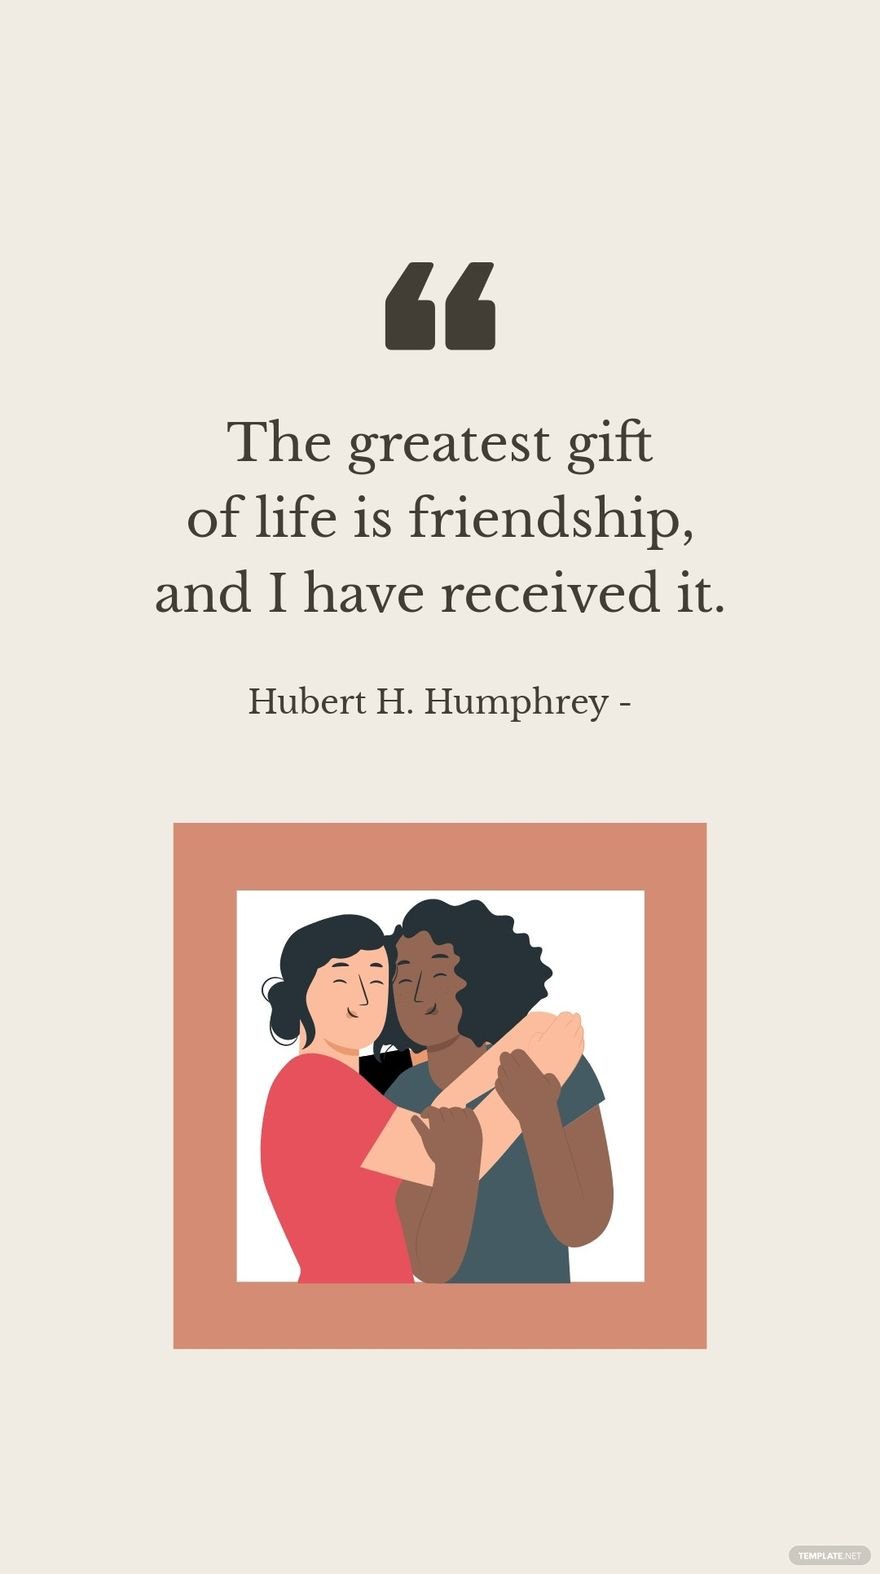 Free Hubert H. Humphrey - The greatest gift of life is friendship, and I have received it. in JPG